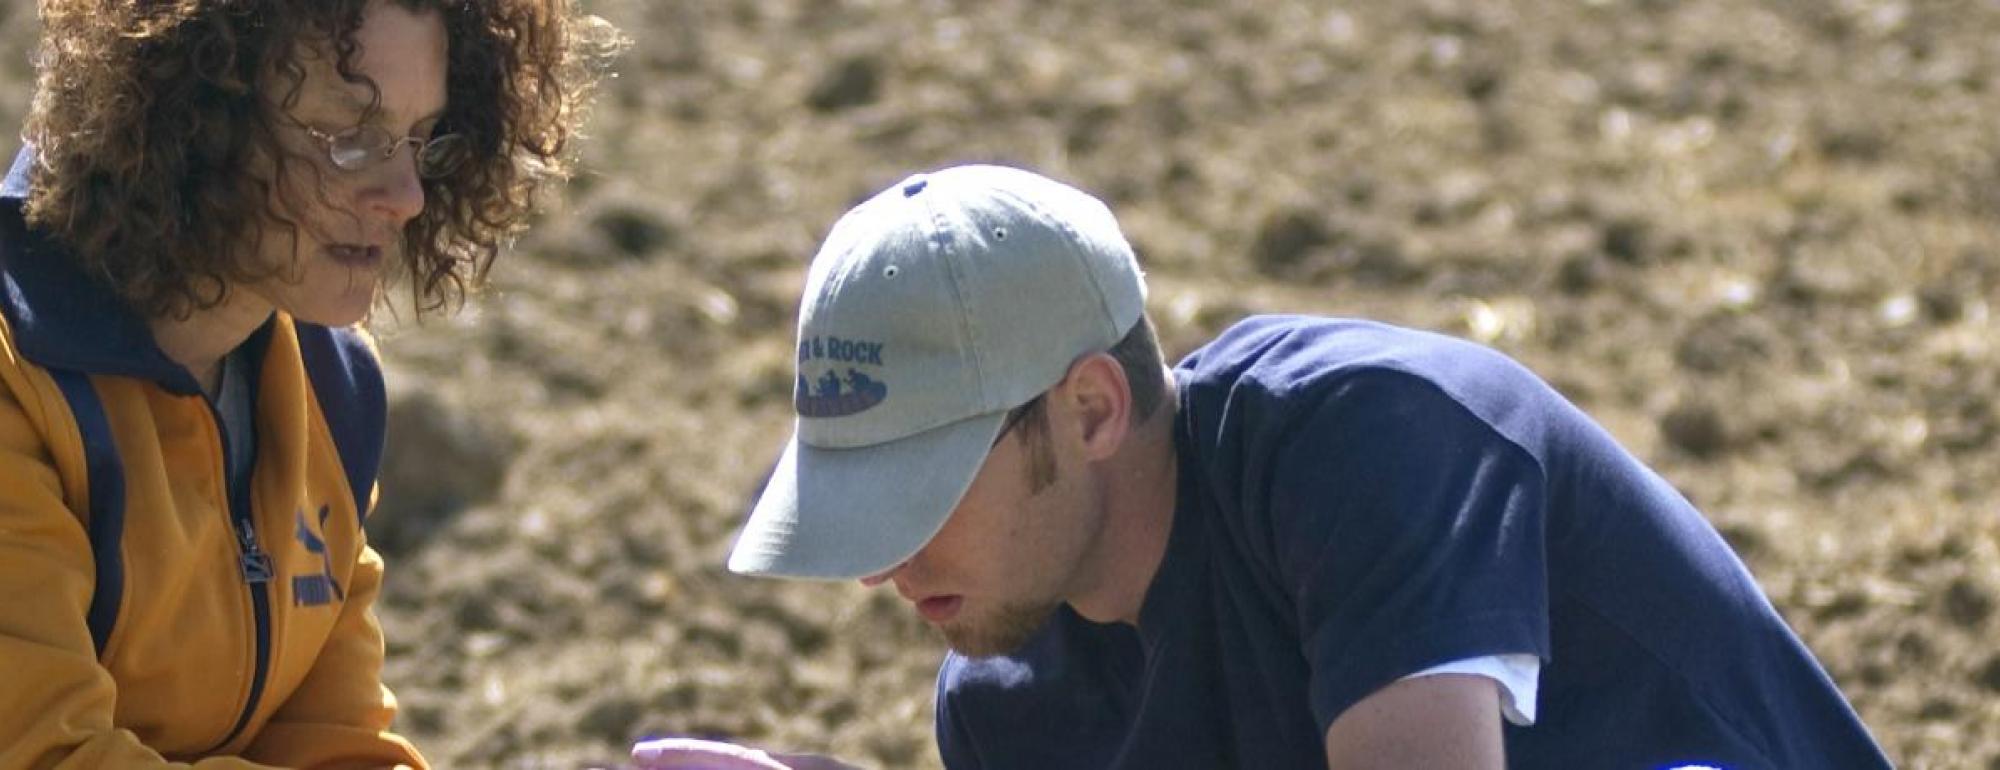 two uc davis students lean over working in dirt field